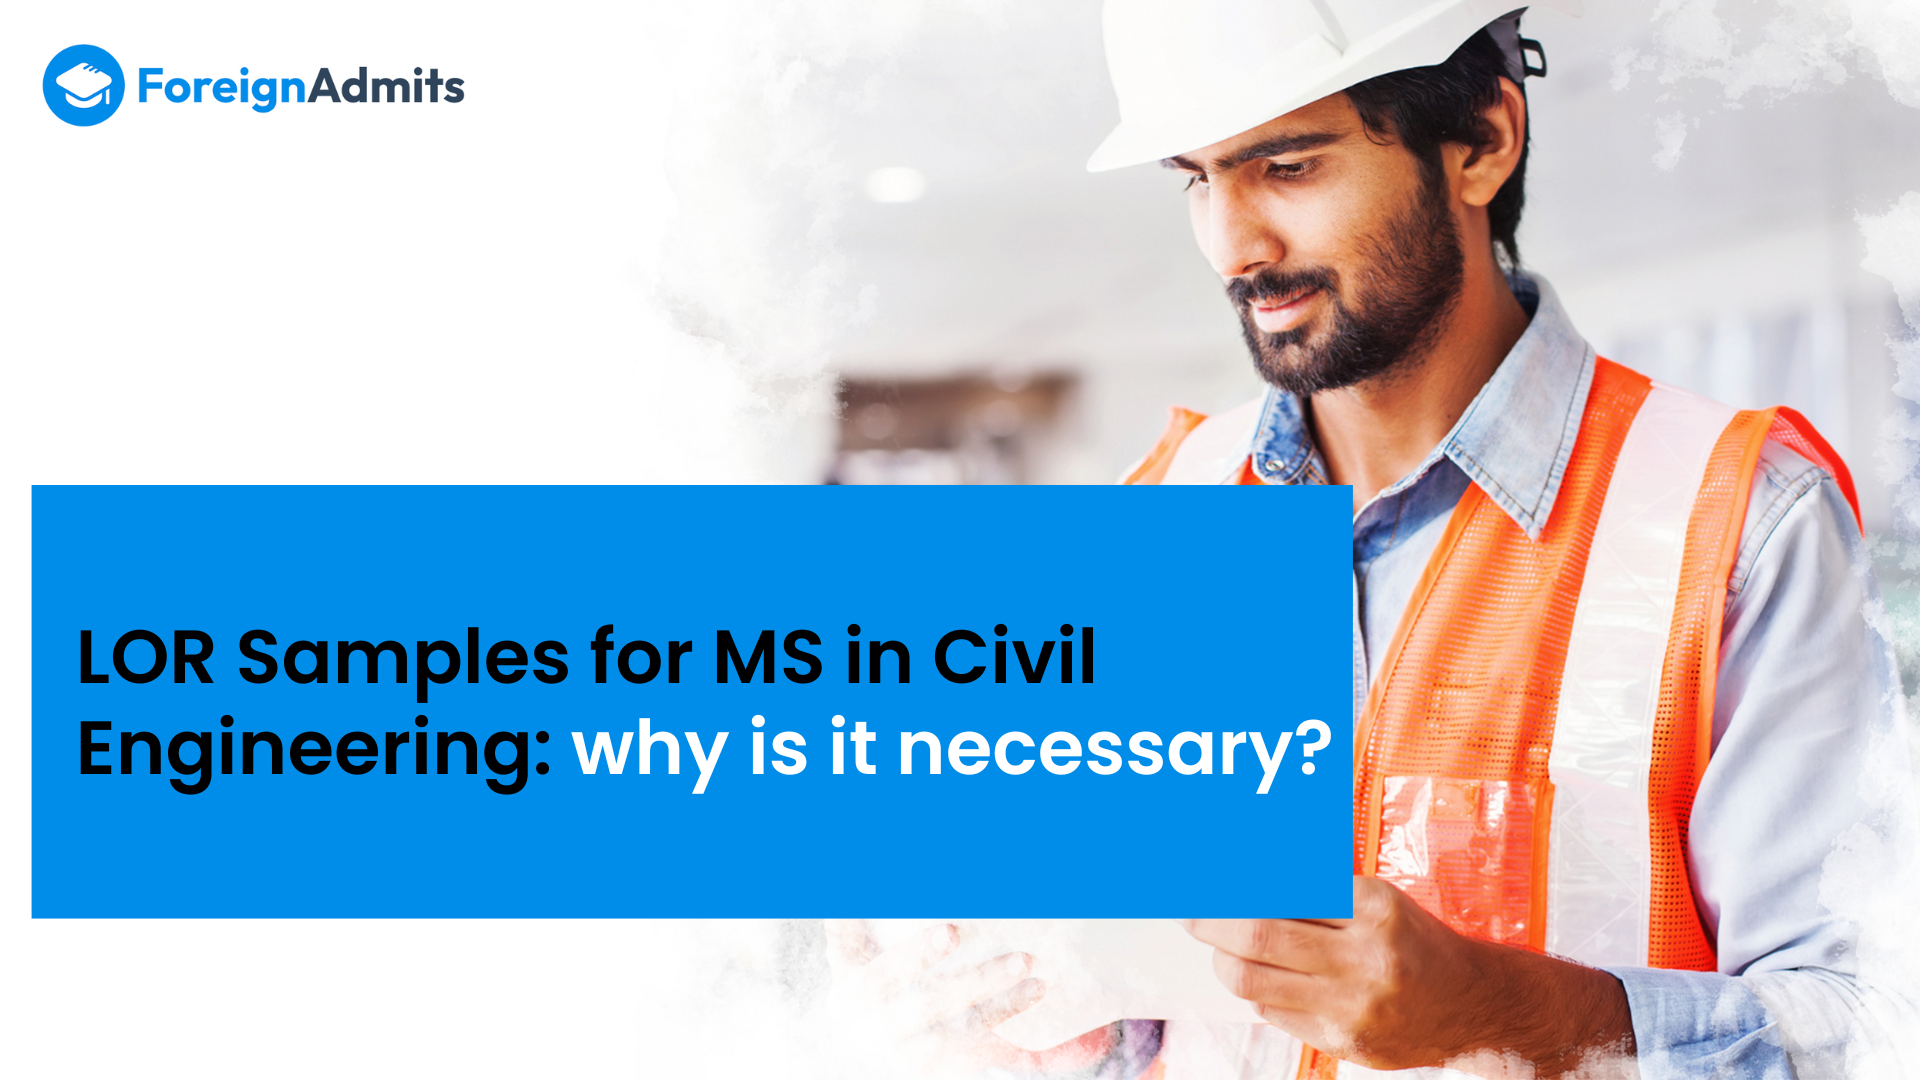 LOR Samples for MS in civil engineering: Why is it necessary?